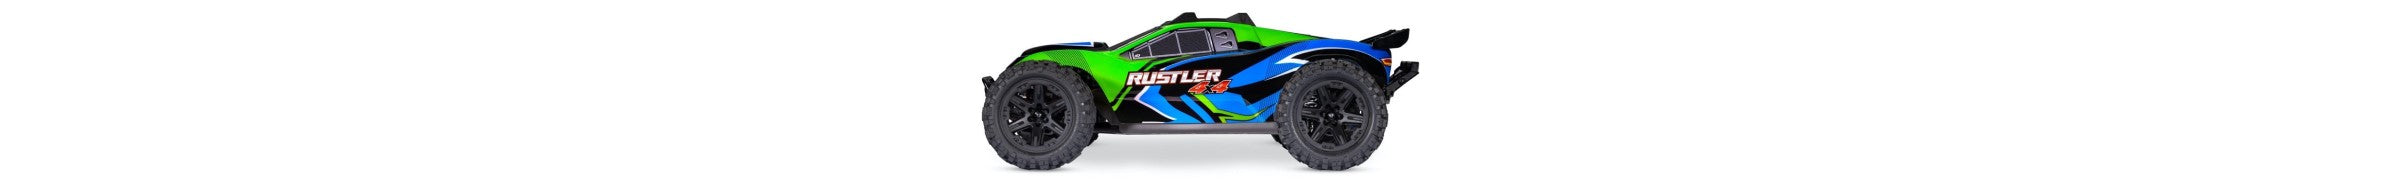 Parts for 67064-61 Traxxas Rustler 4WD 1/10 XL-5 Stadium Truck with LED Lighting